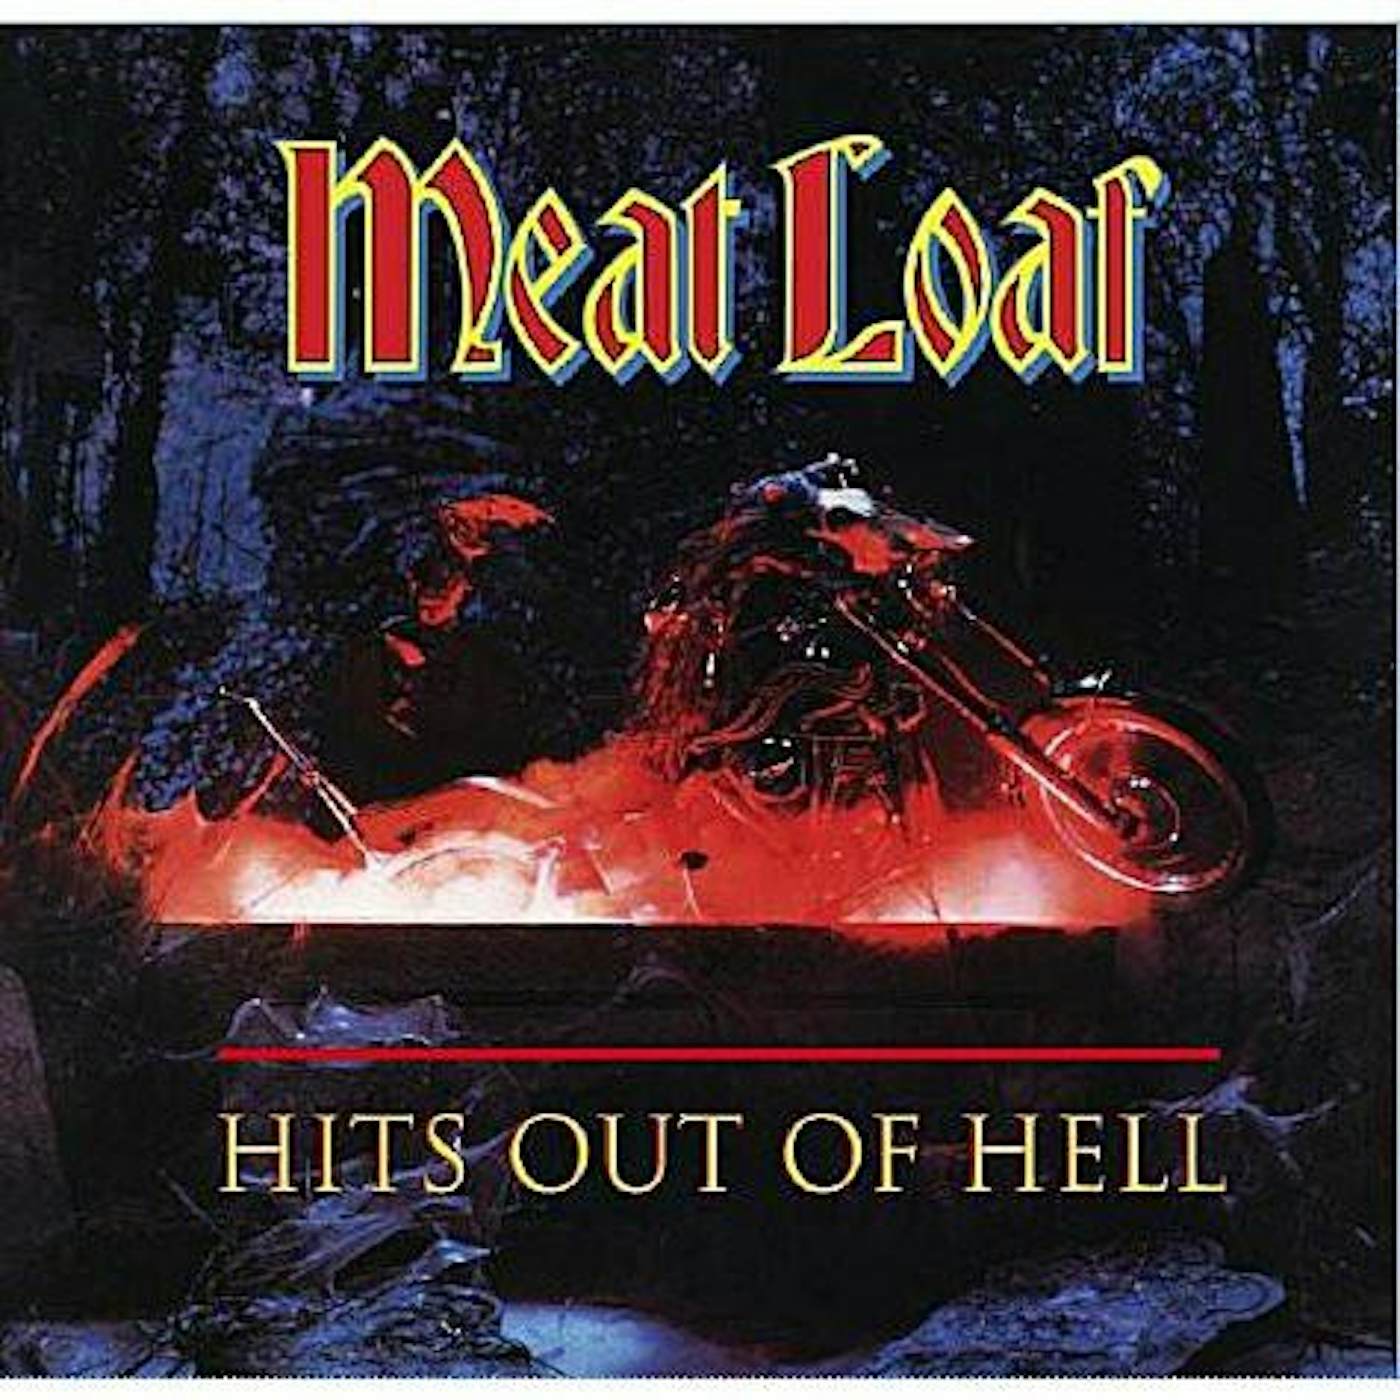 MEAT LOAF: HITS OUT OF HELL CD